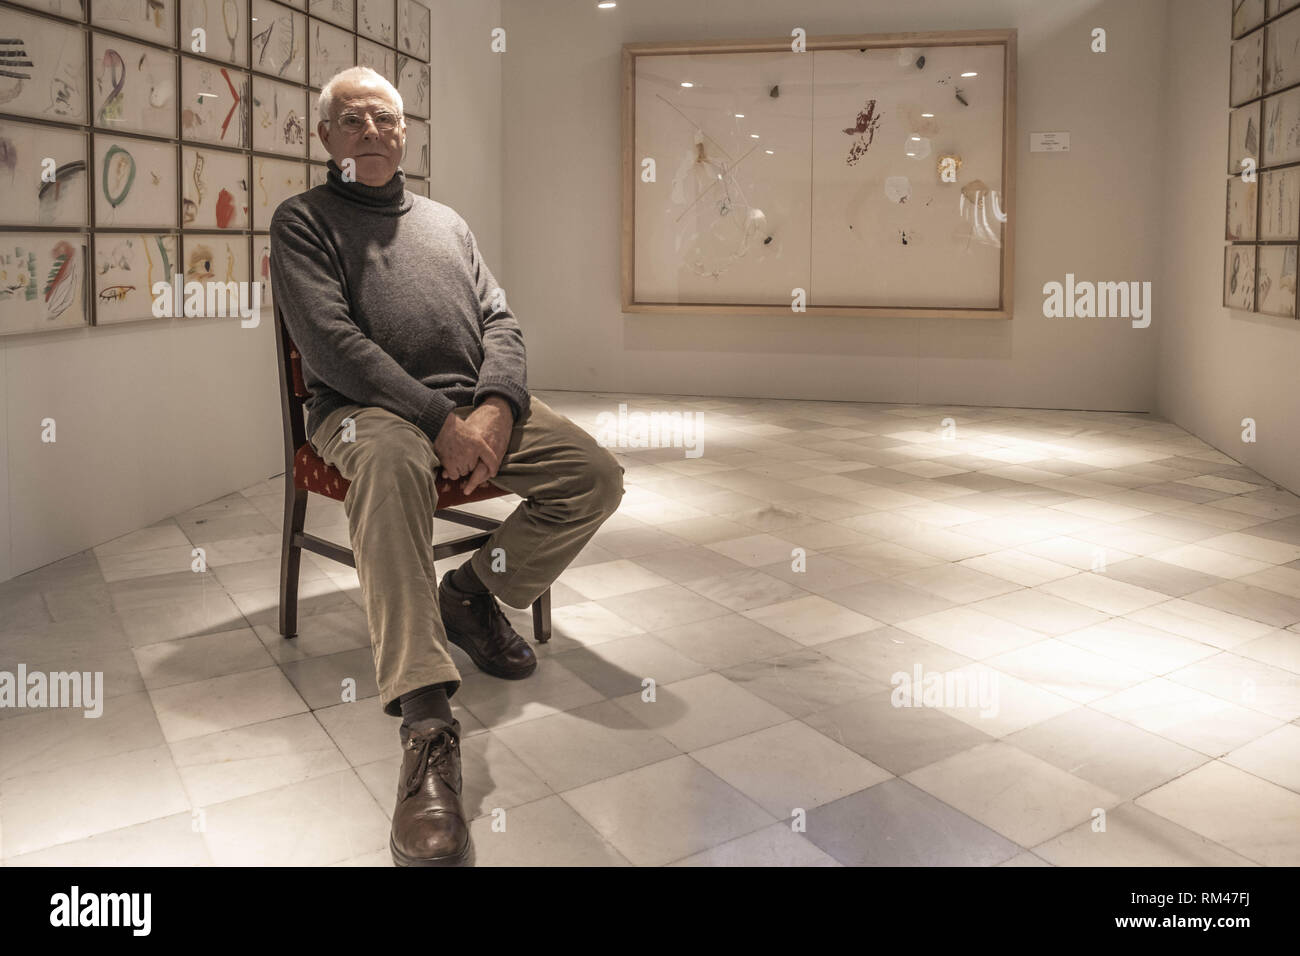 Barcelona, Catalonia, Spain. 13th Feb, 2019. The artist Antoni LLena is seen during the presentation of his new exhibition in the rooms of the Palau de la MÃºsica Catalana.The historic catalan artist Antoni Llena has presented his temporary project ''Signs of smoke from the subsoil''. The exhibition that is shown in the rooms of the Palau de la MÃºsica Catalana, collects 100 drawings that will be shown until March 19, 2019. Credit: Paco Freire/SOPA Images/ZUMA Wire/Alamy Live News Stock Photo